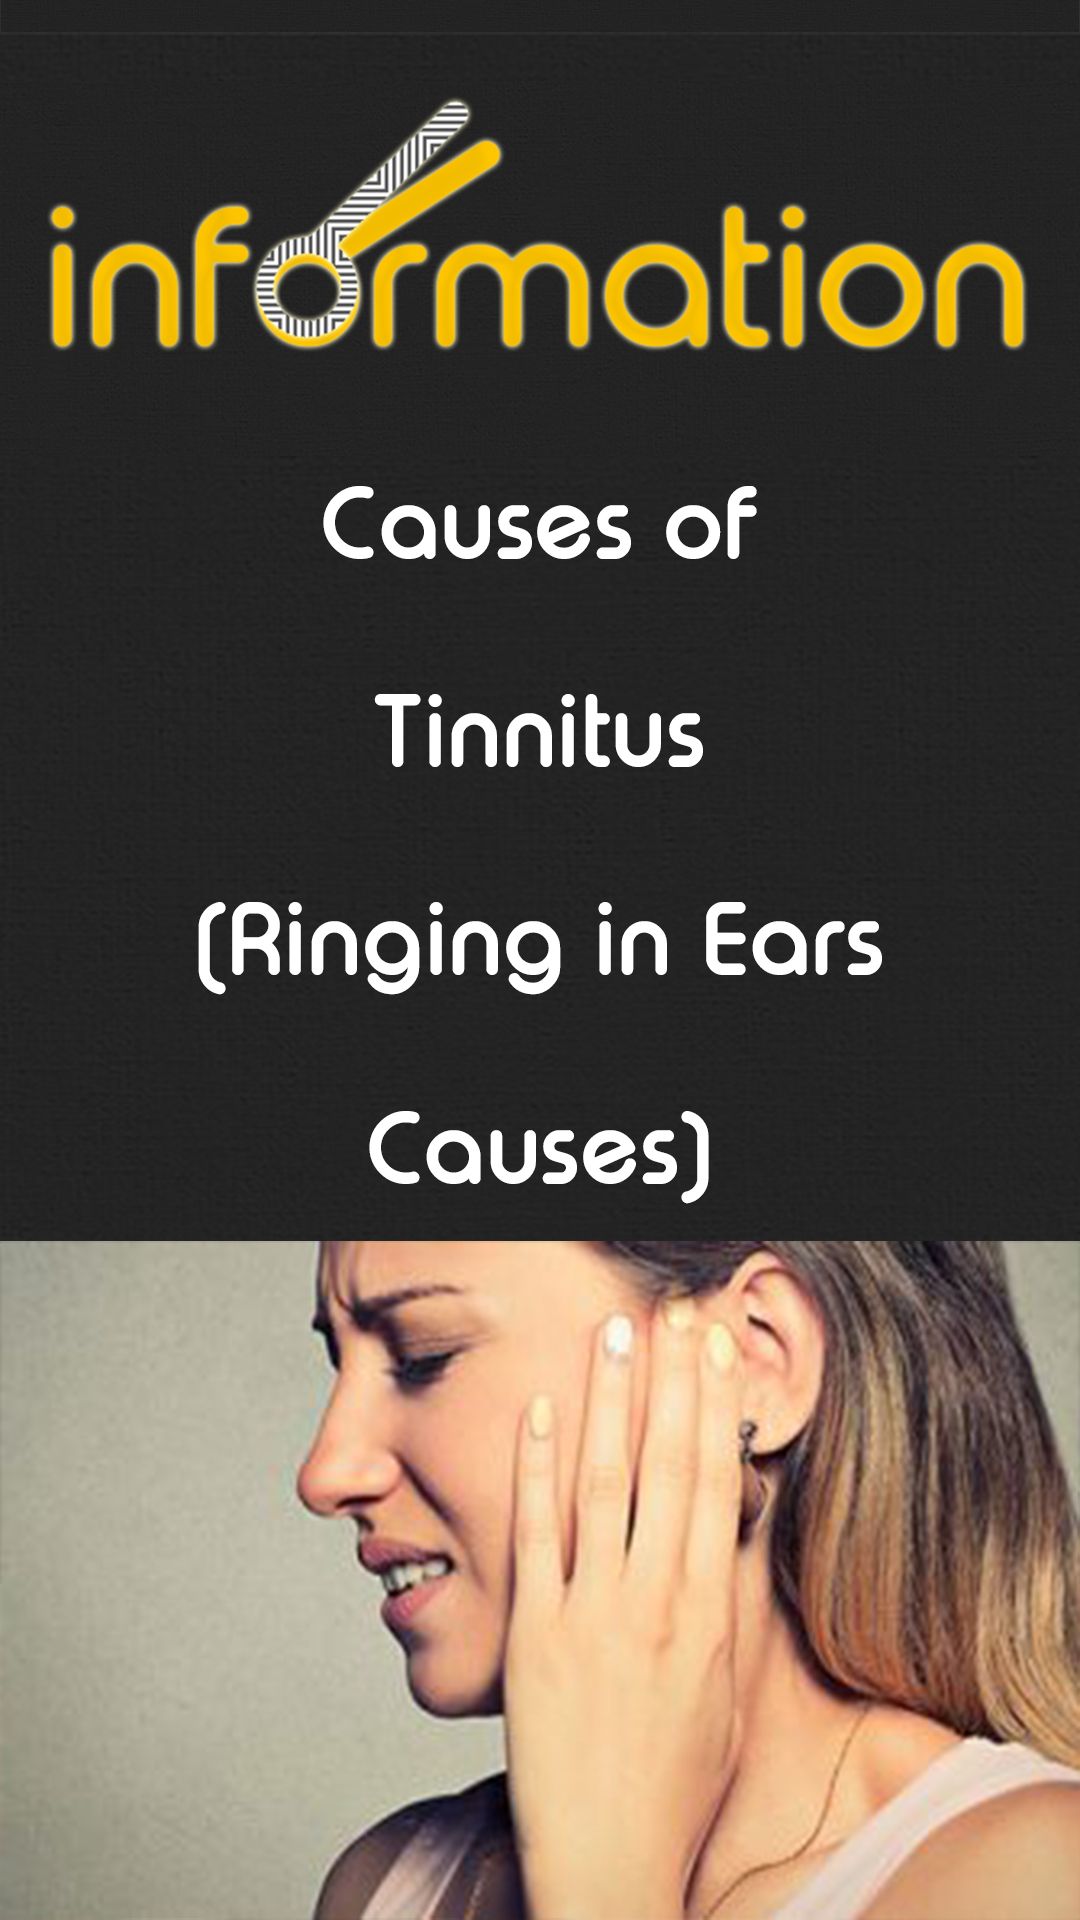 Causes of Tinnitus (Ringing in Ears Causes)